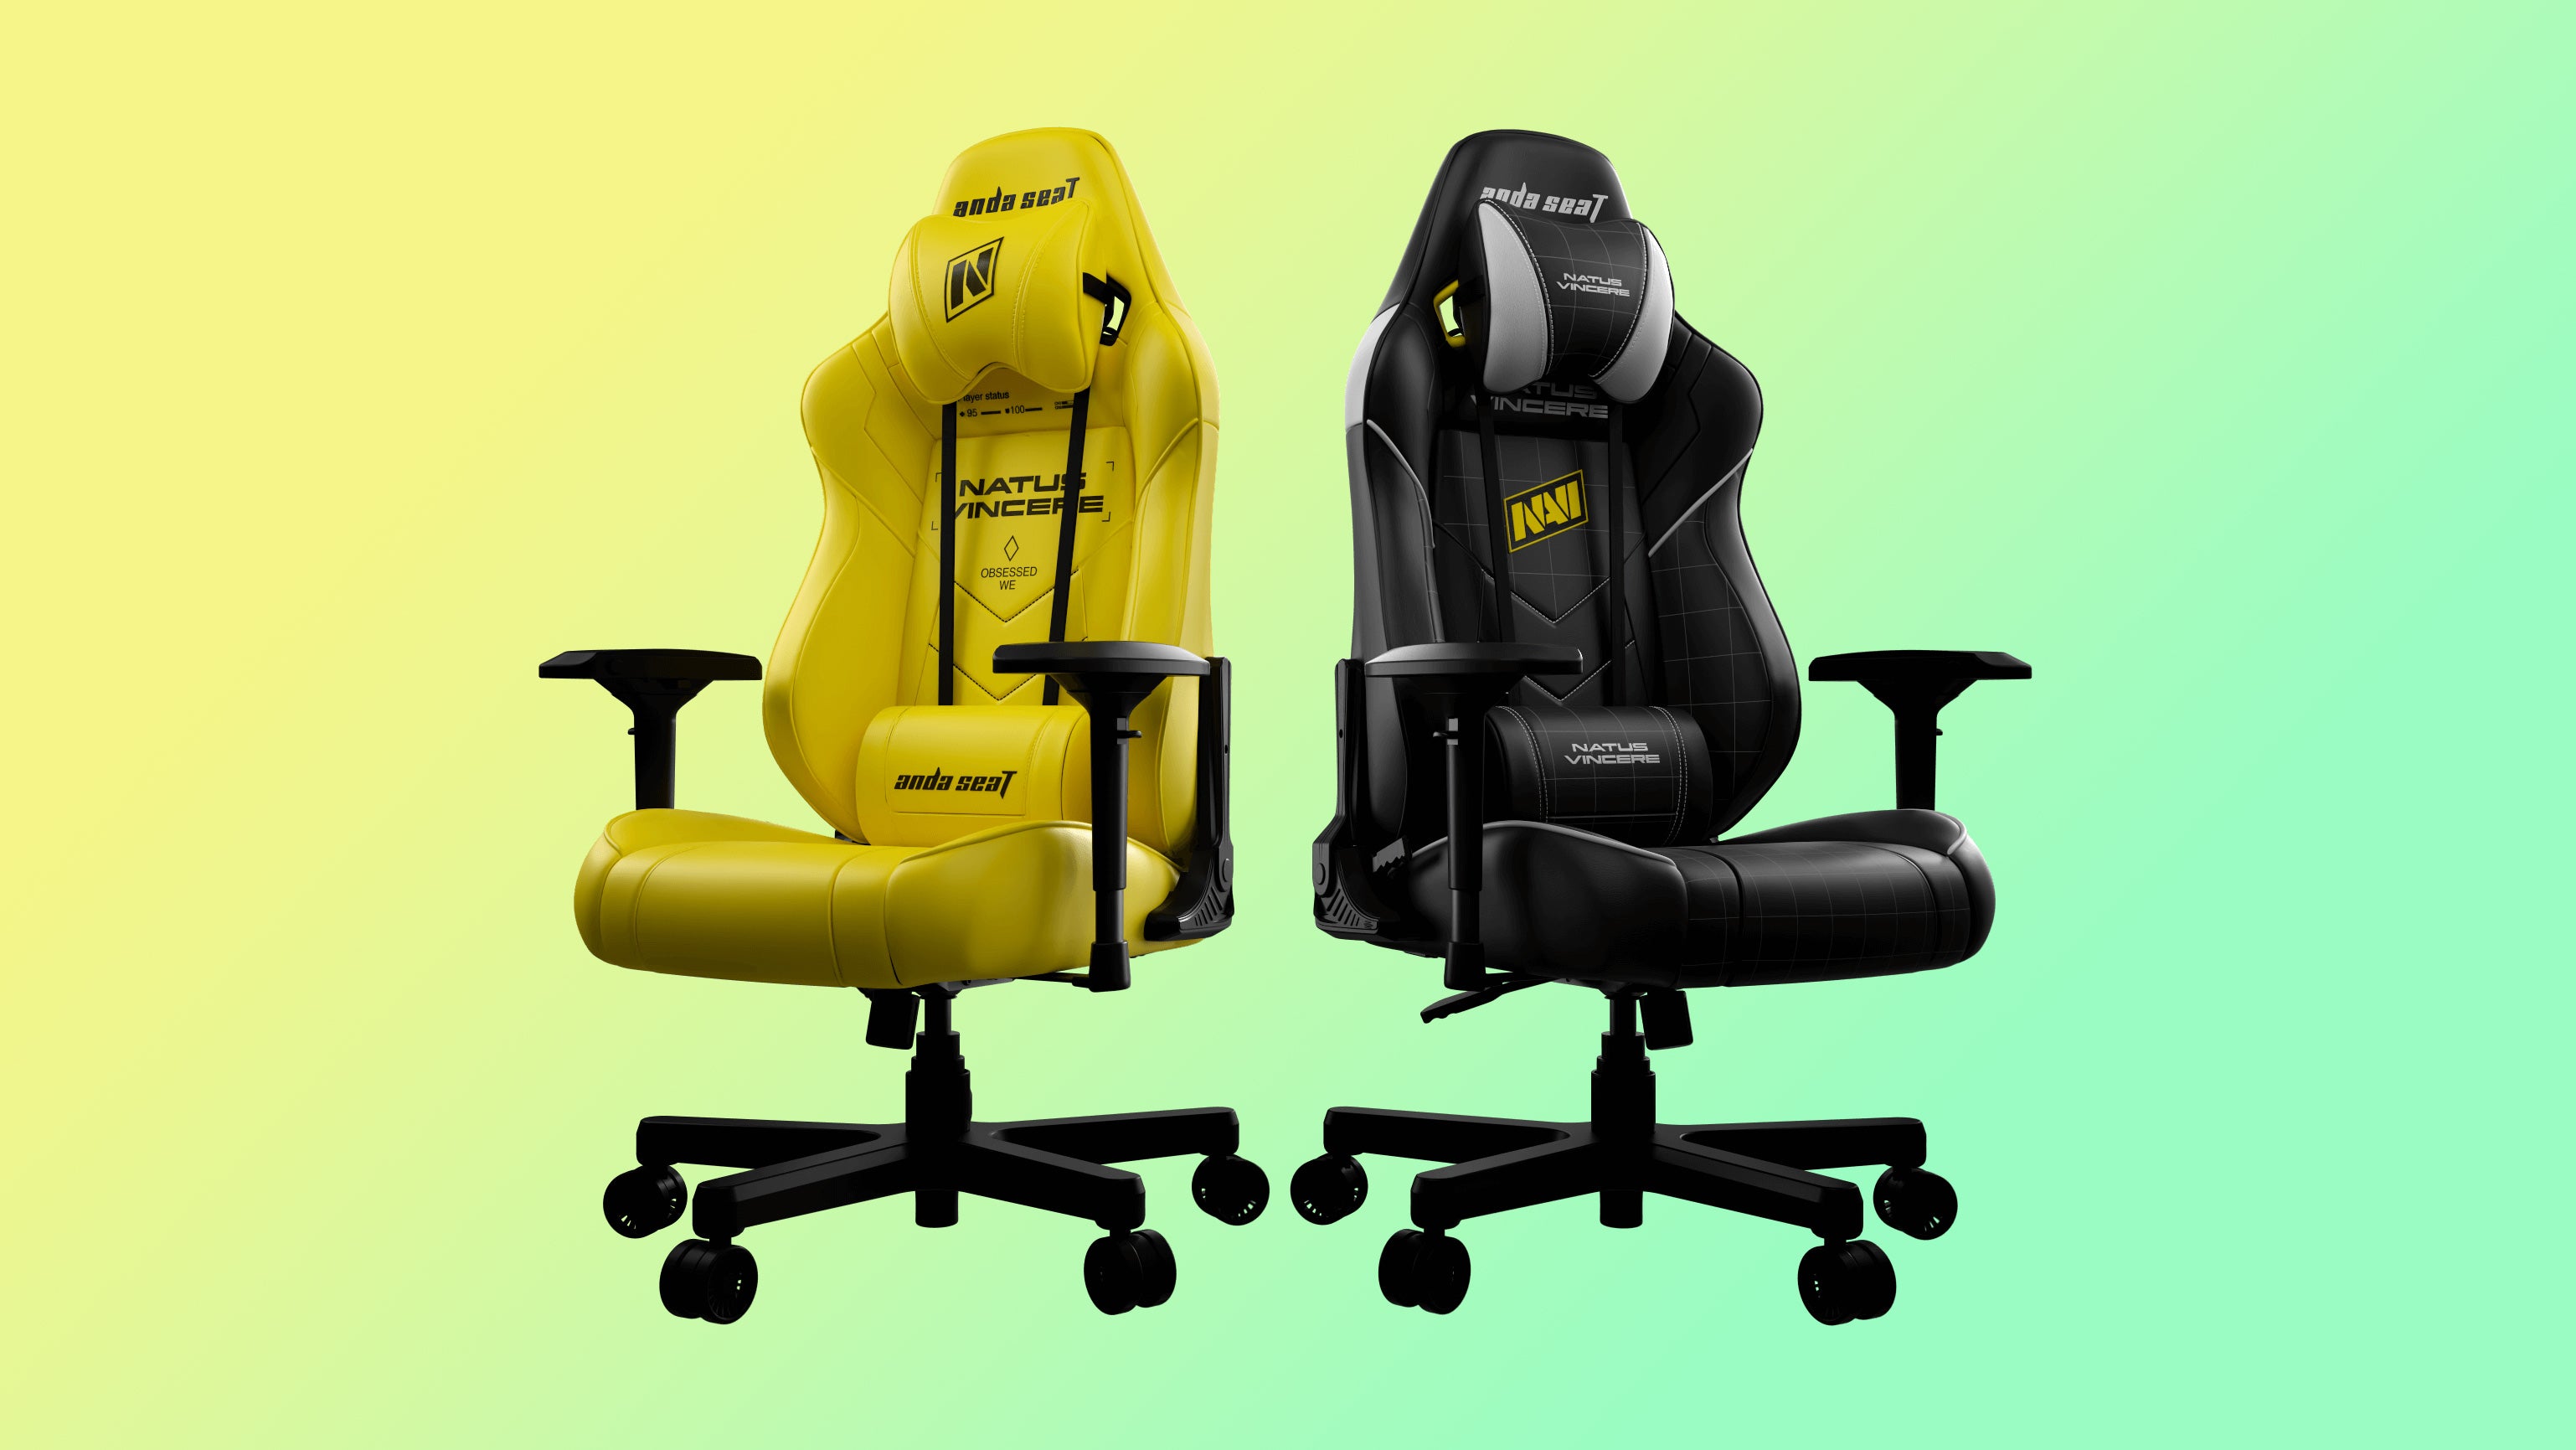 andaseat gaming chairs